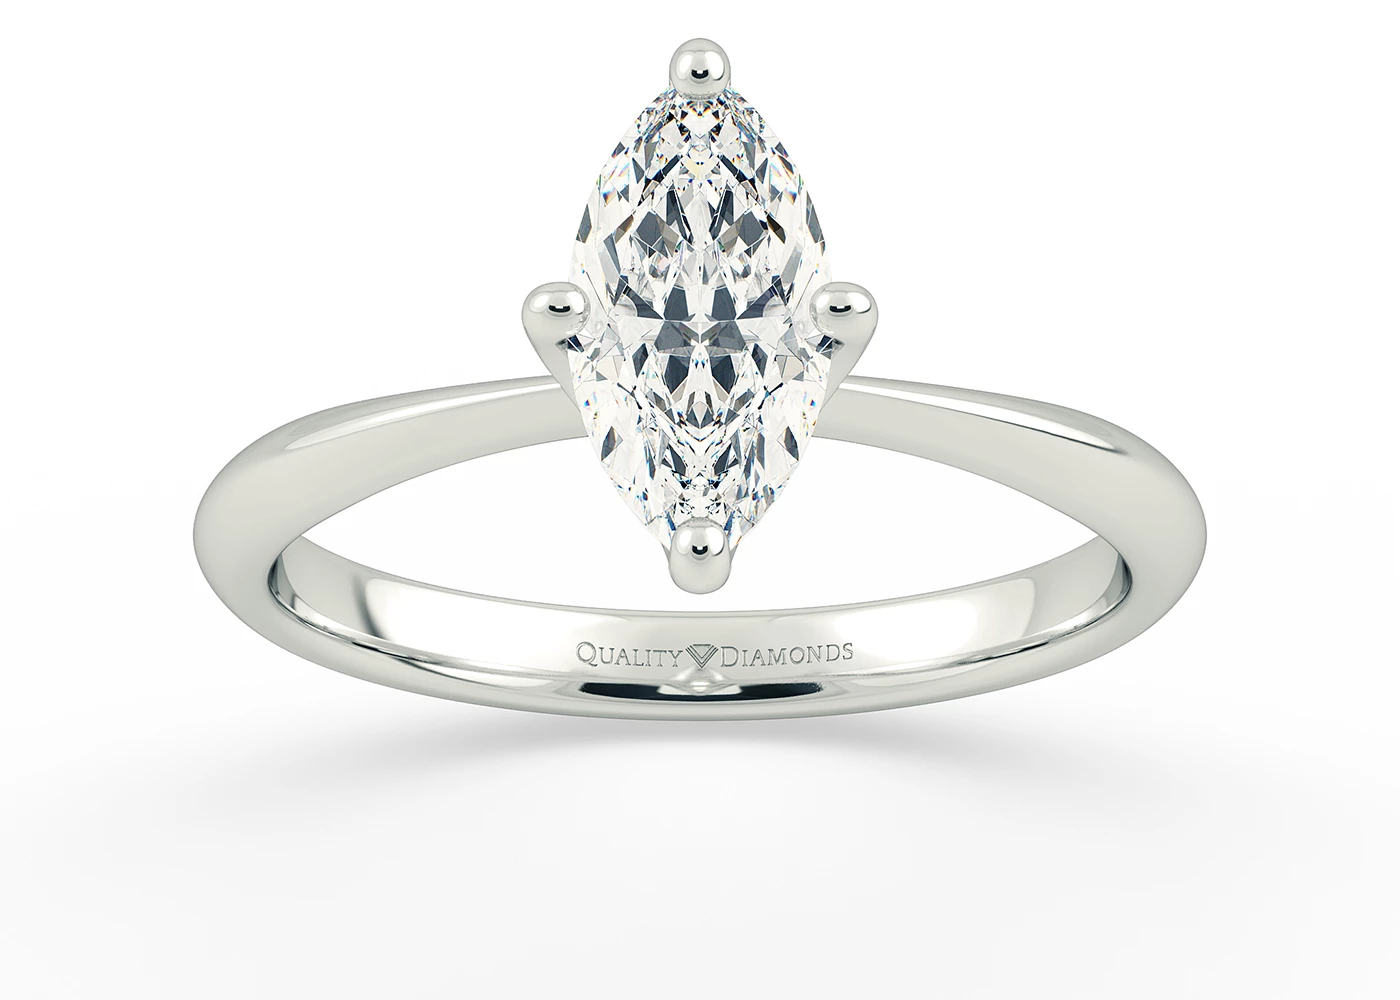 One Carat Marquise Solitaire Diamond Engagement Ring in 18K White Gold